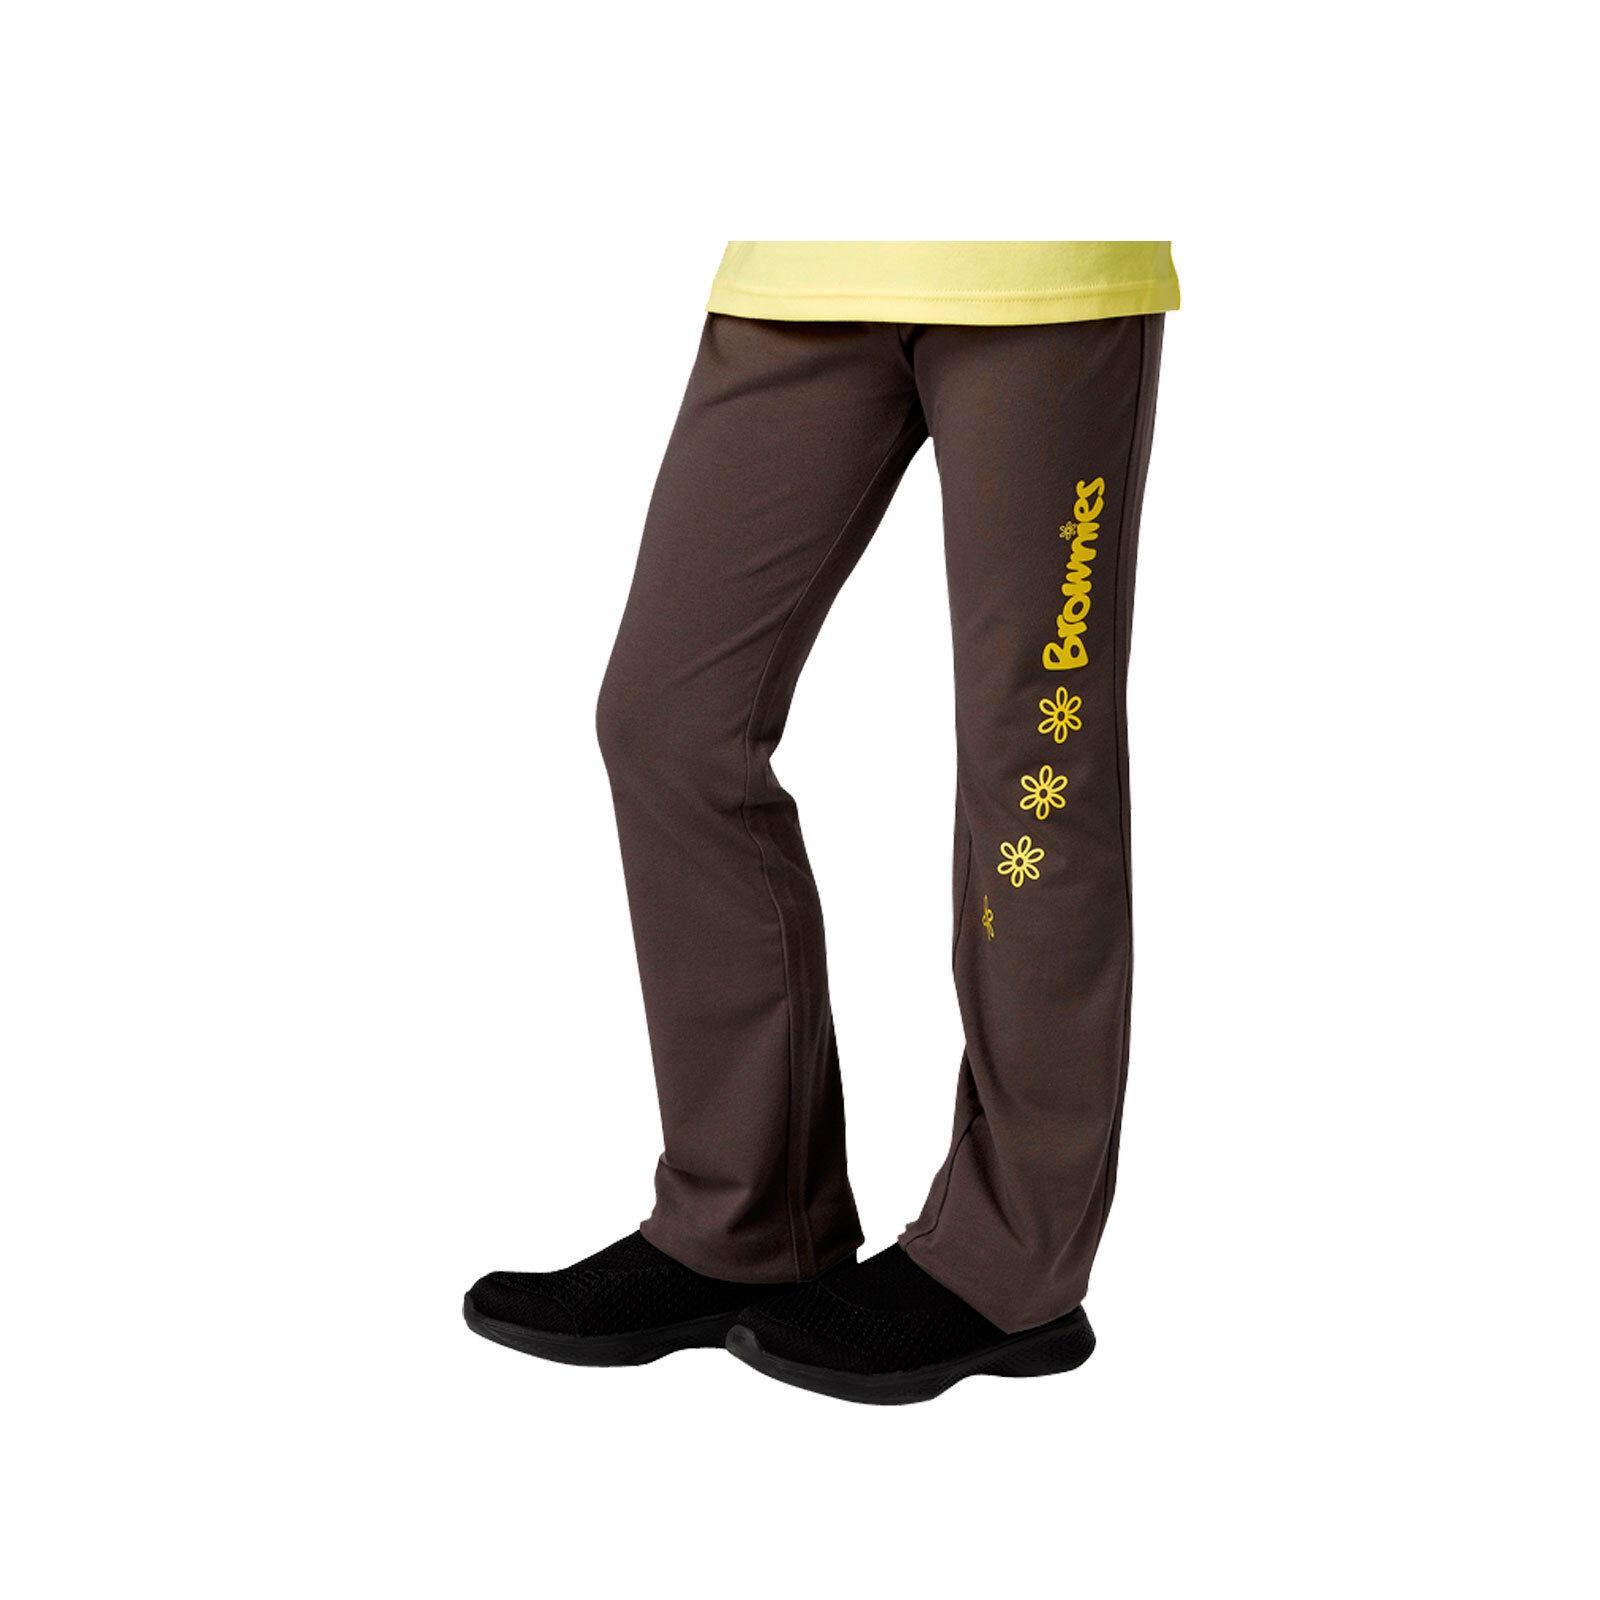 Official Brownie Girl Guides Uniform Trousers Brownies Active Pants 32